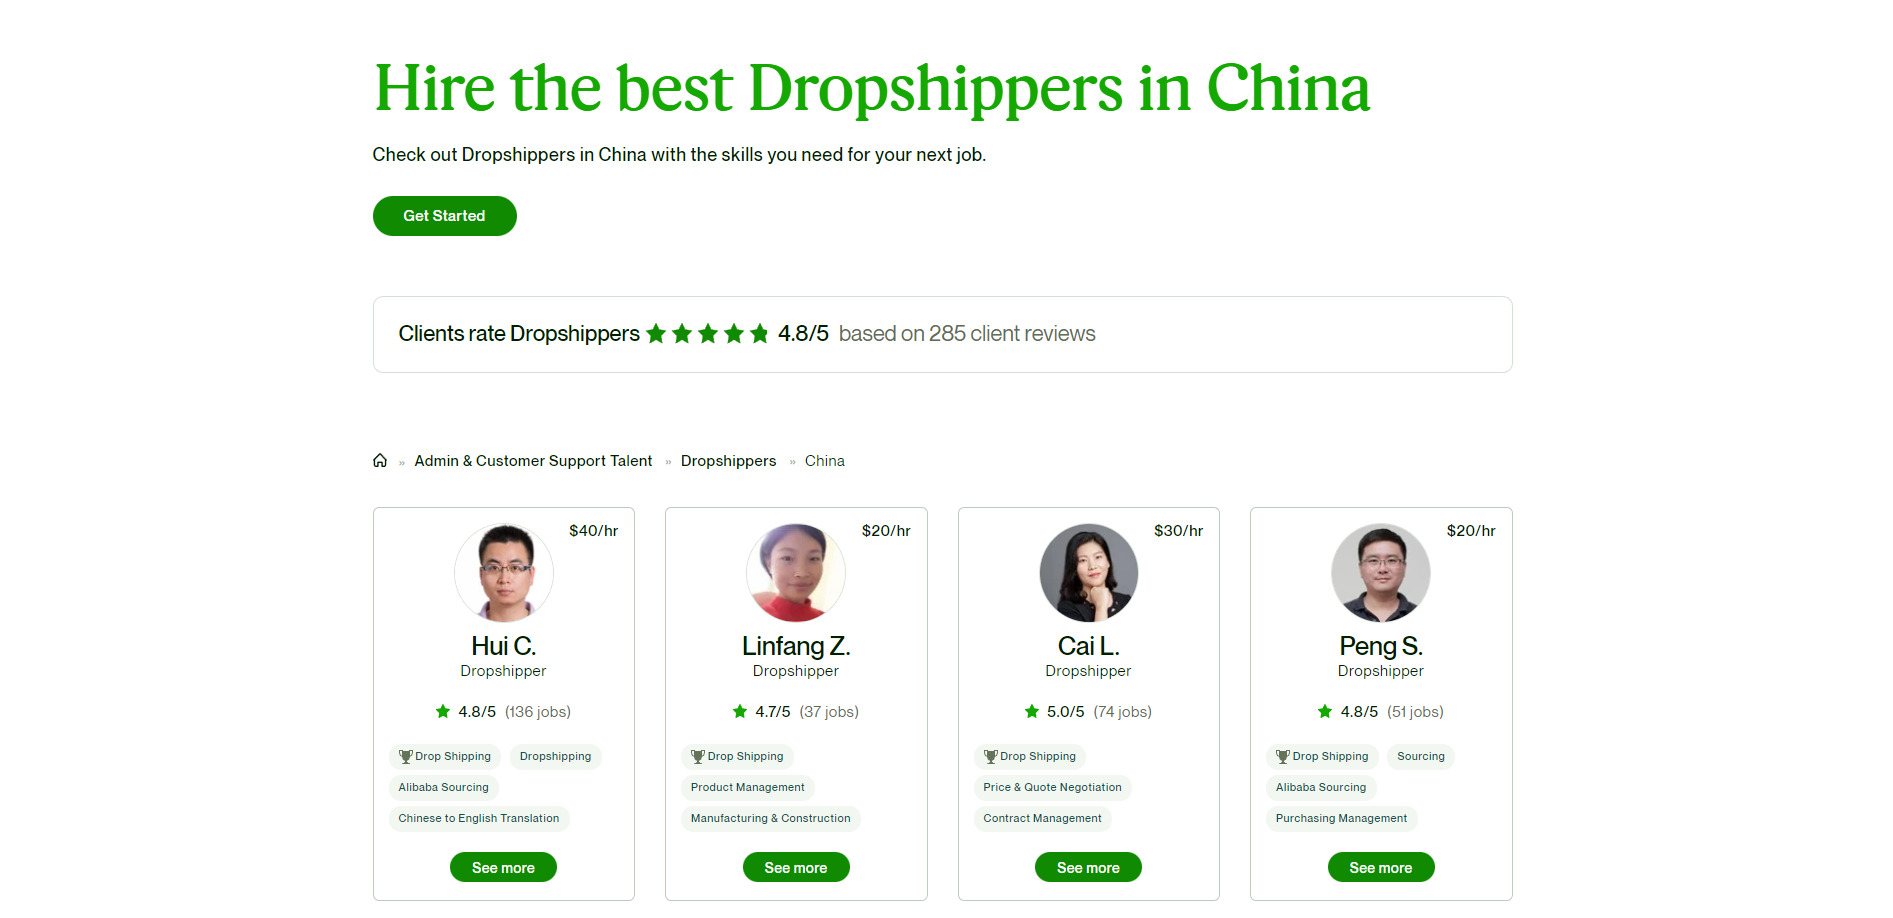 Dropshipping agents in China on Upwork